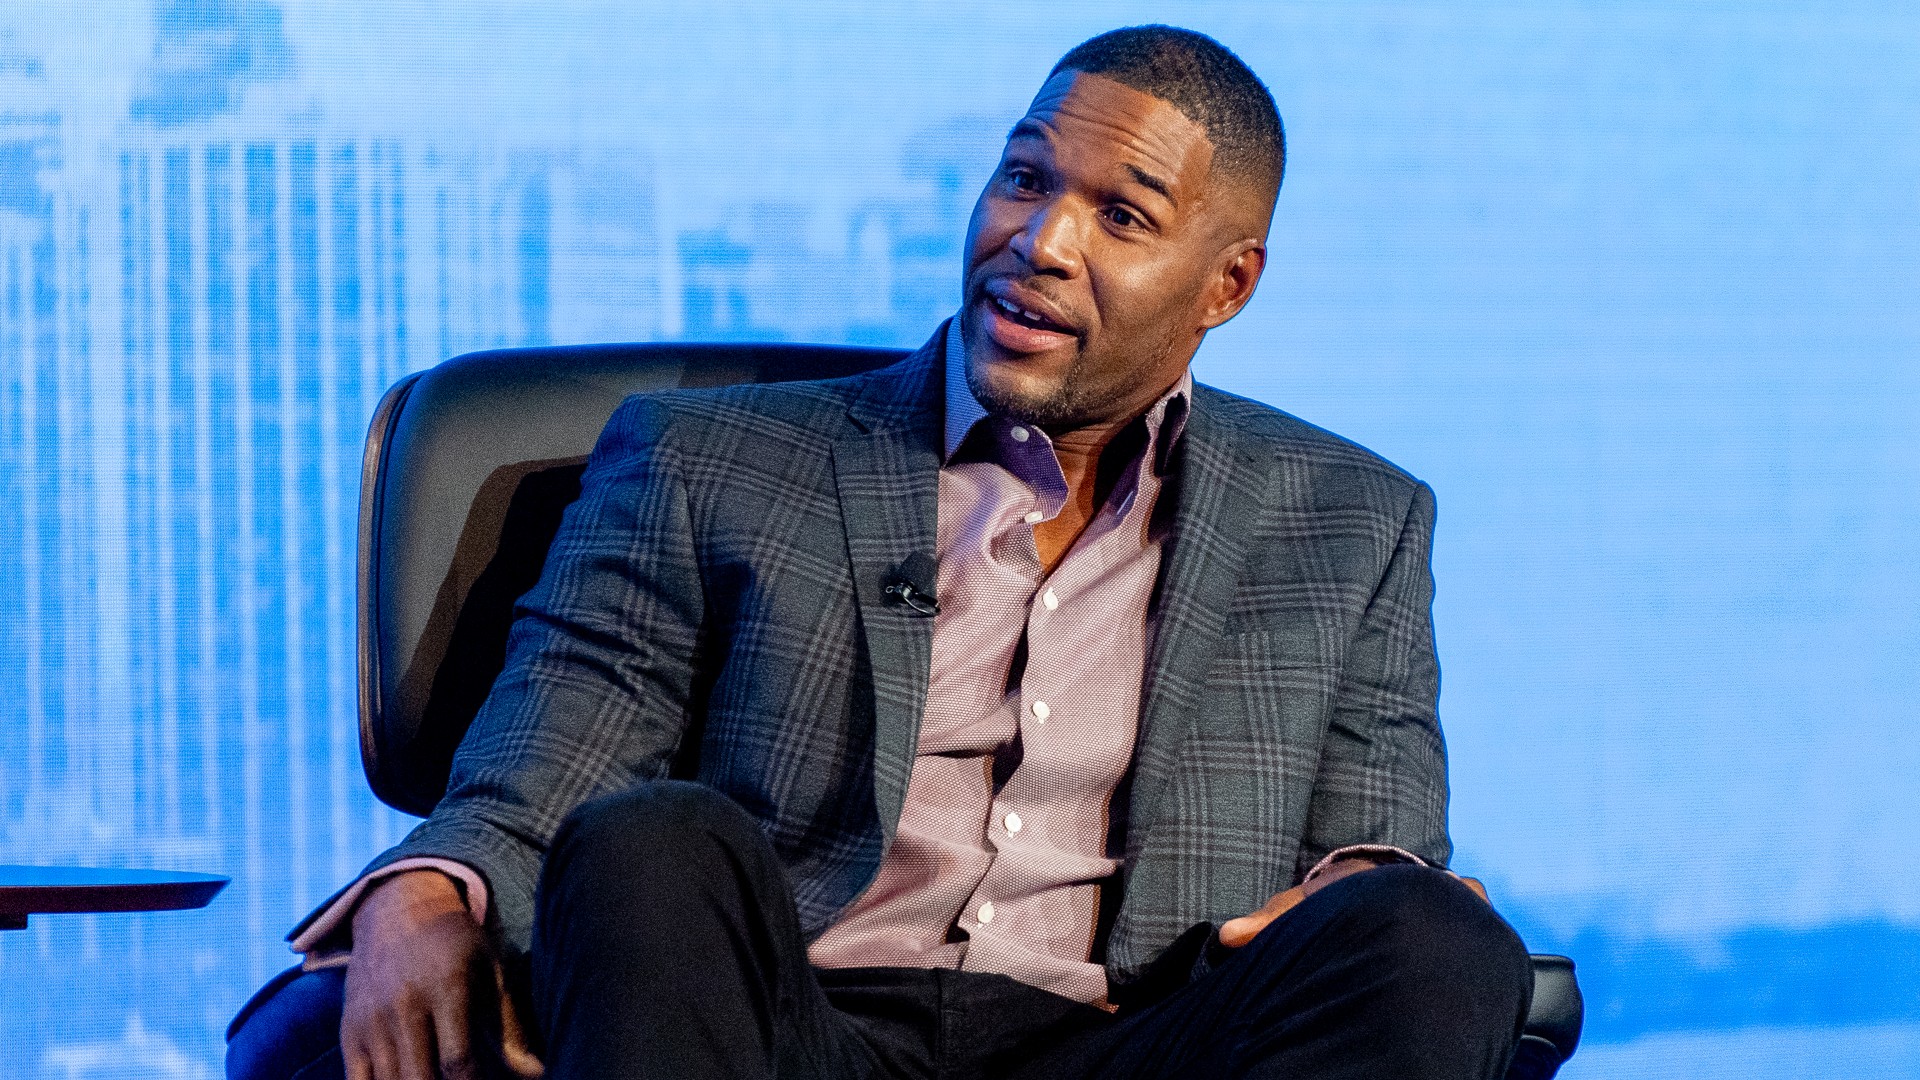 Michael Strahan announces plans to embark on Blue Origin flight: 'I'm going to space!'